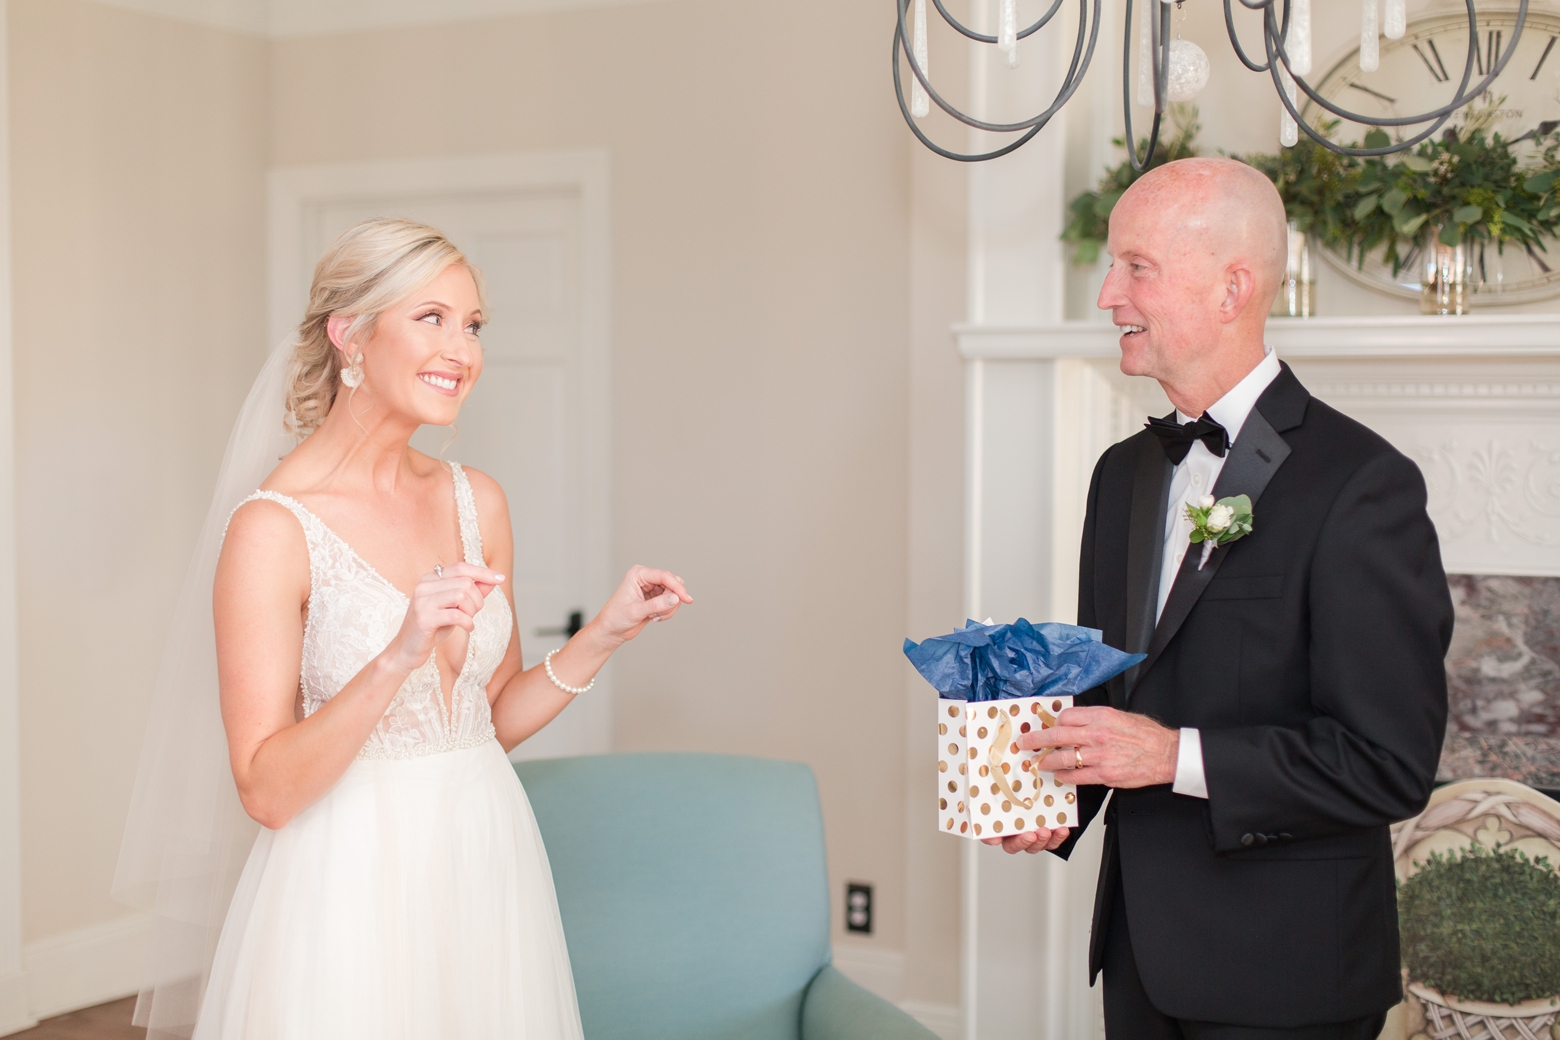 The Historic Post Office Wedding by Angie McPherson Photography